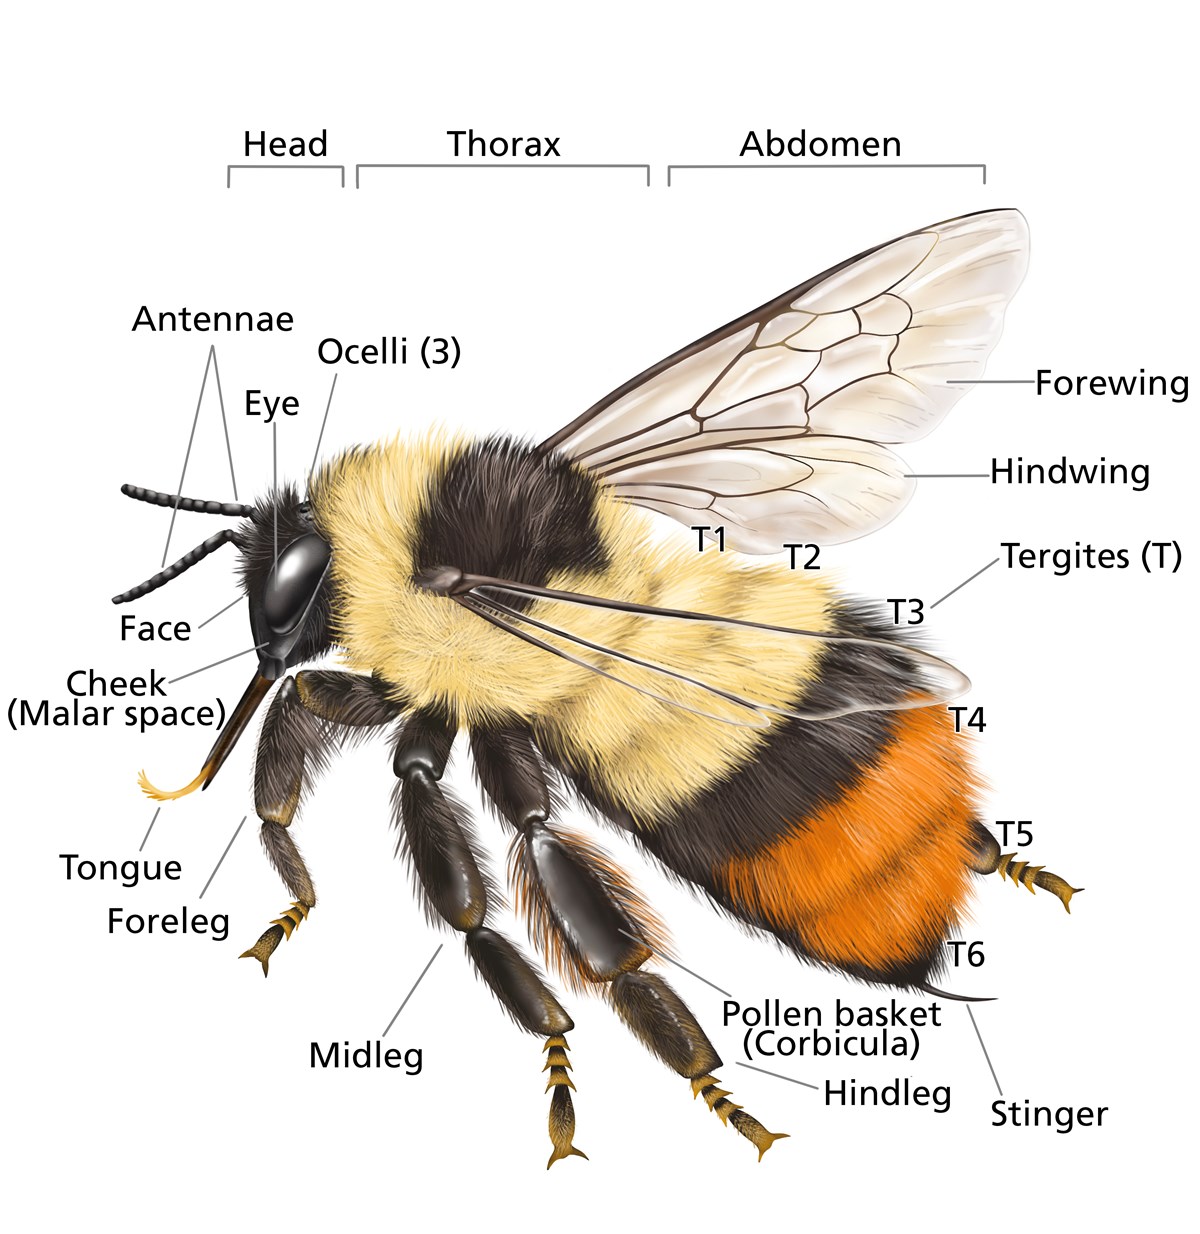 illustration of a bee with labels indicating its head, thorax, and abdomen, as well as sub units within that